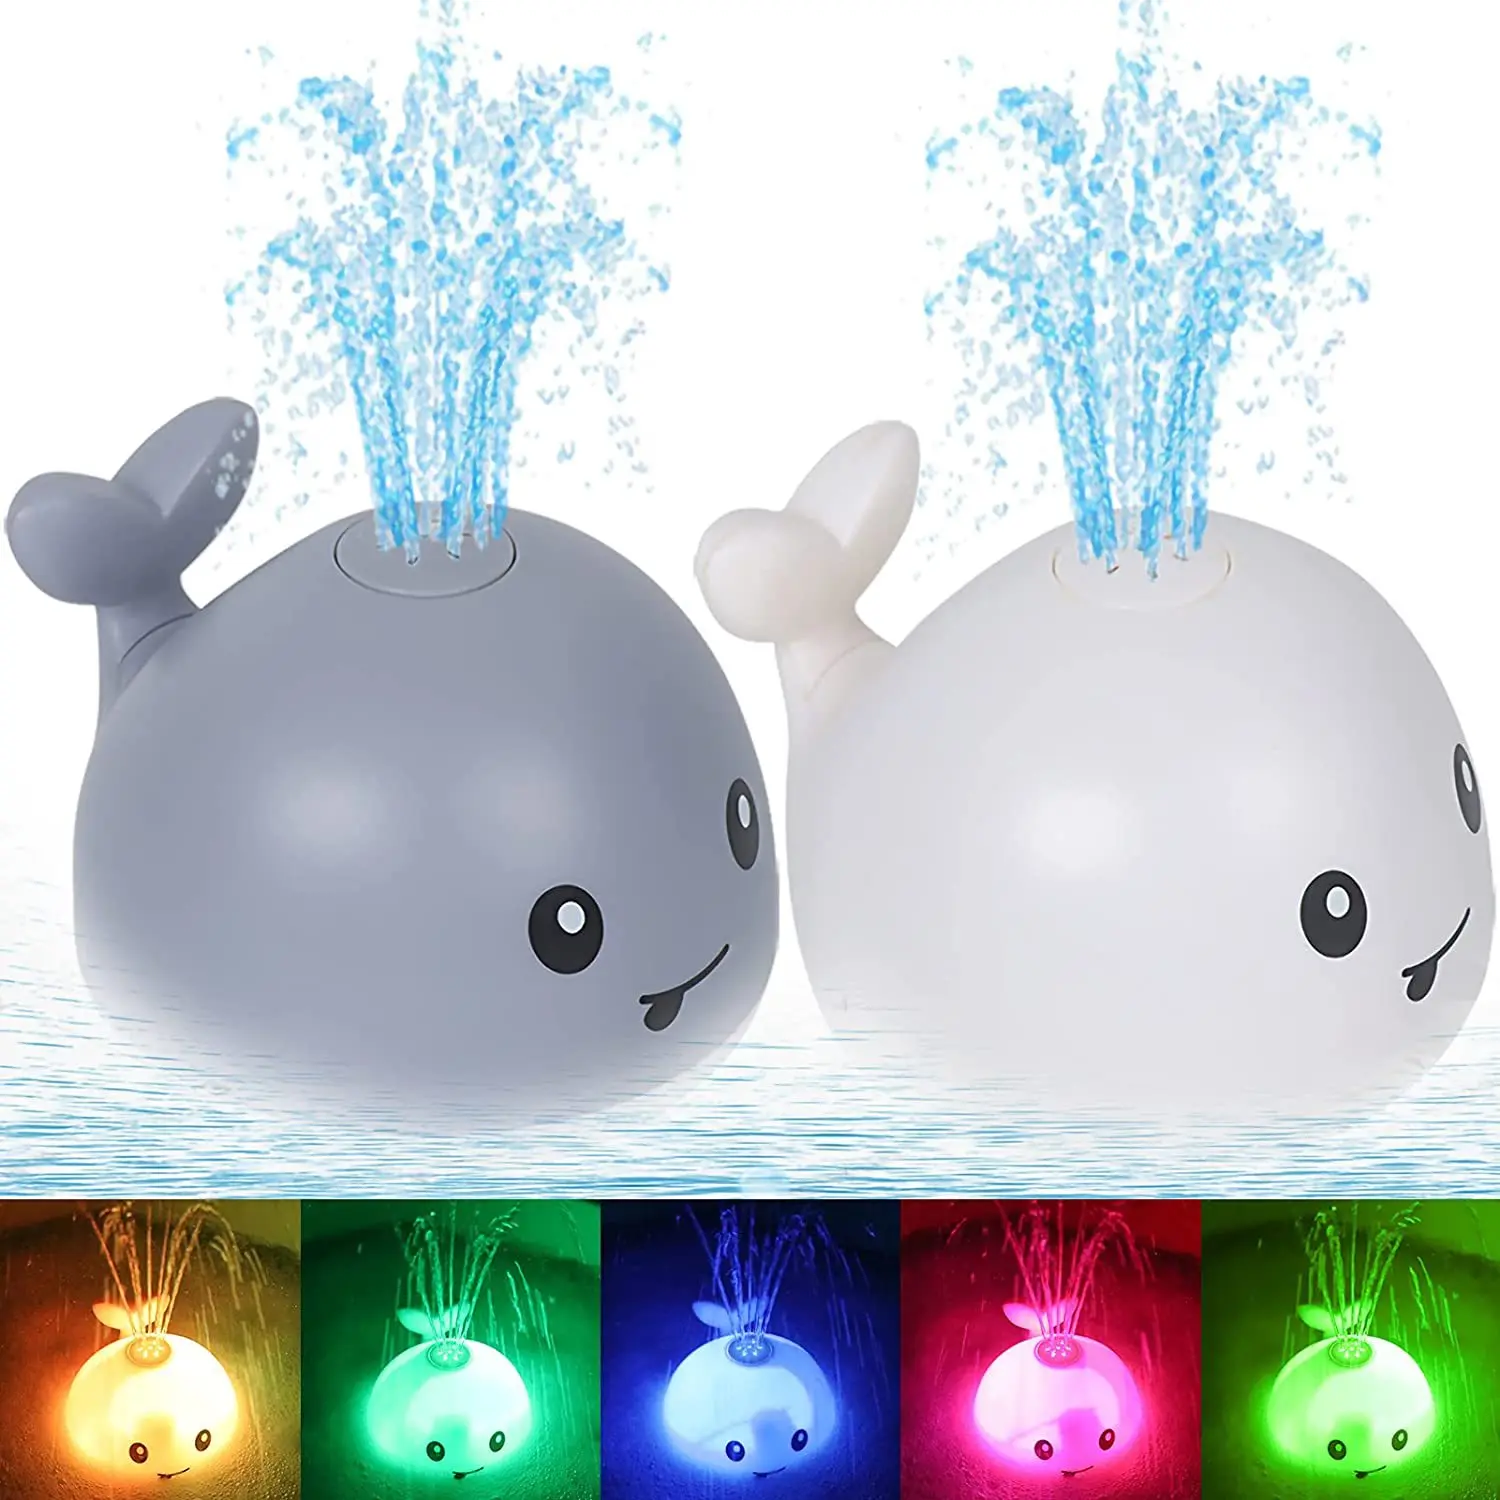 

Baby Light Up Bath Tub Toys Whale Water Sprinkler Pool Toys for Toddlers Infants Whale Water Sprinkler Pool Toy